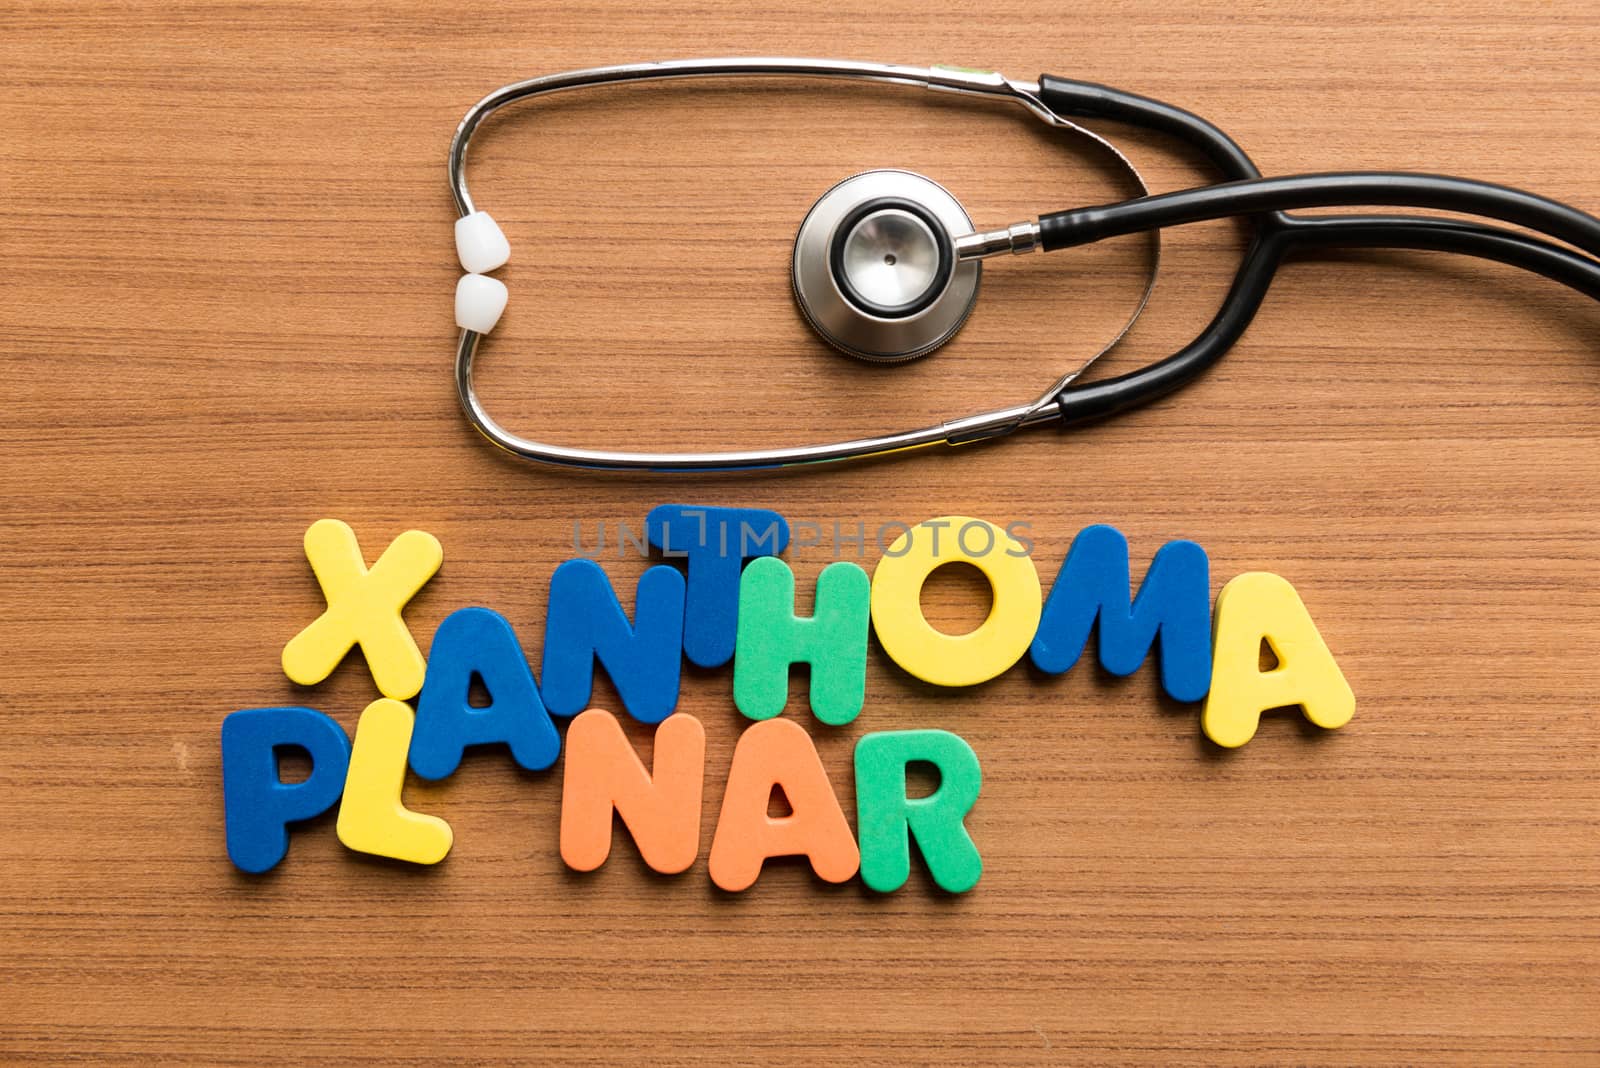 xanthoma planar colorful word with stethoscope on wooden background